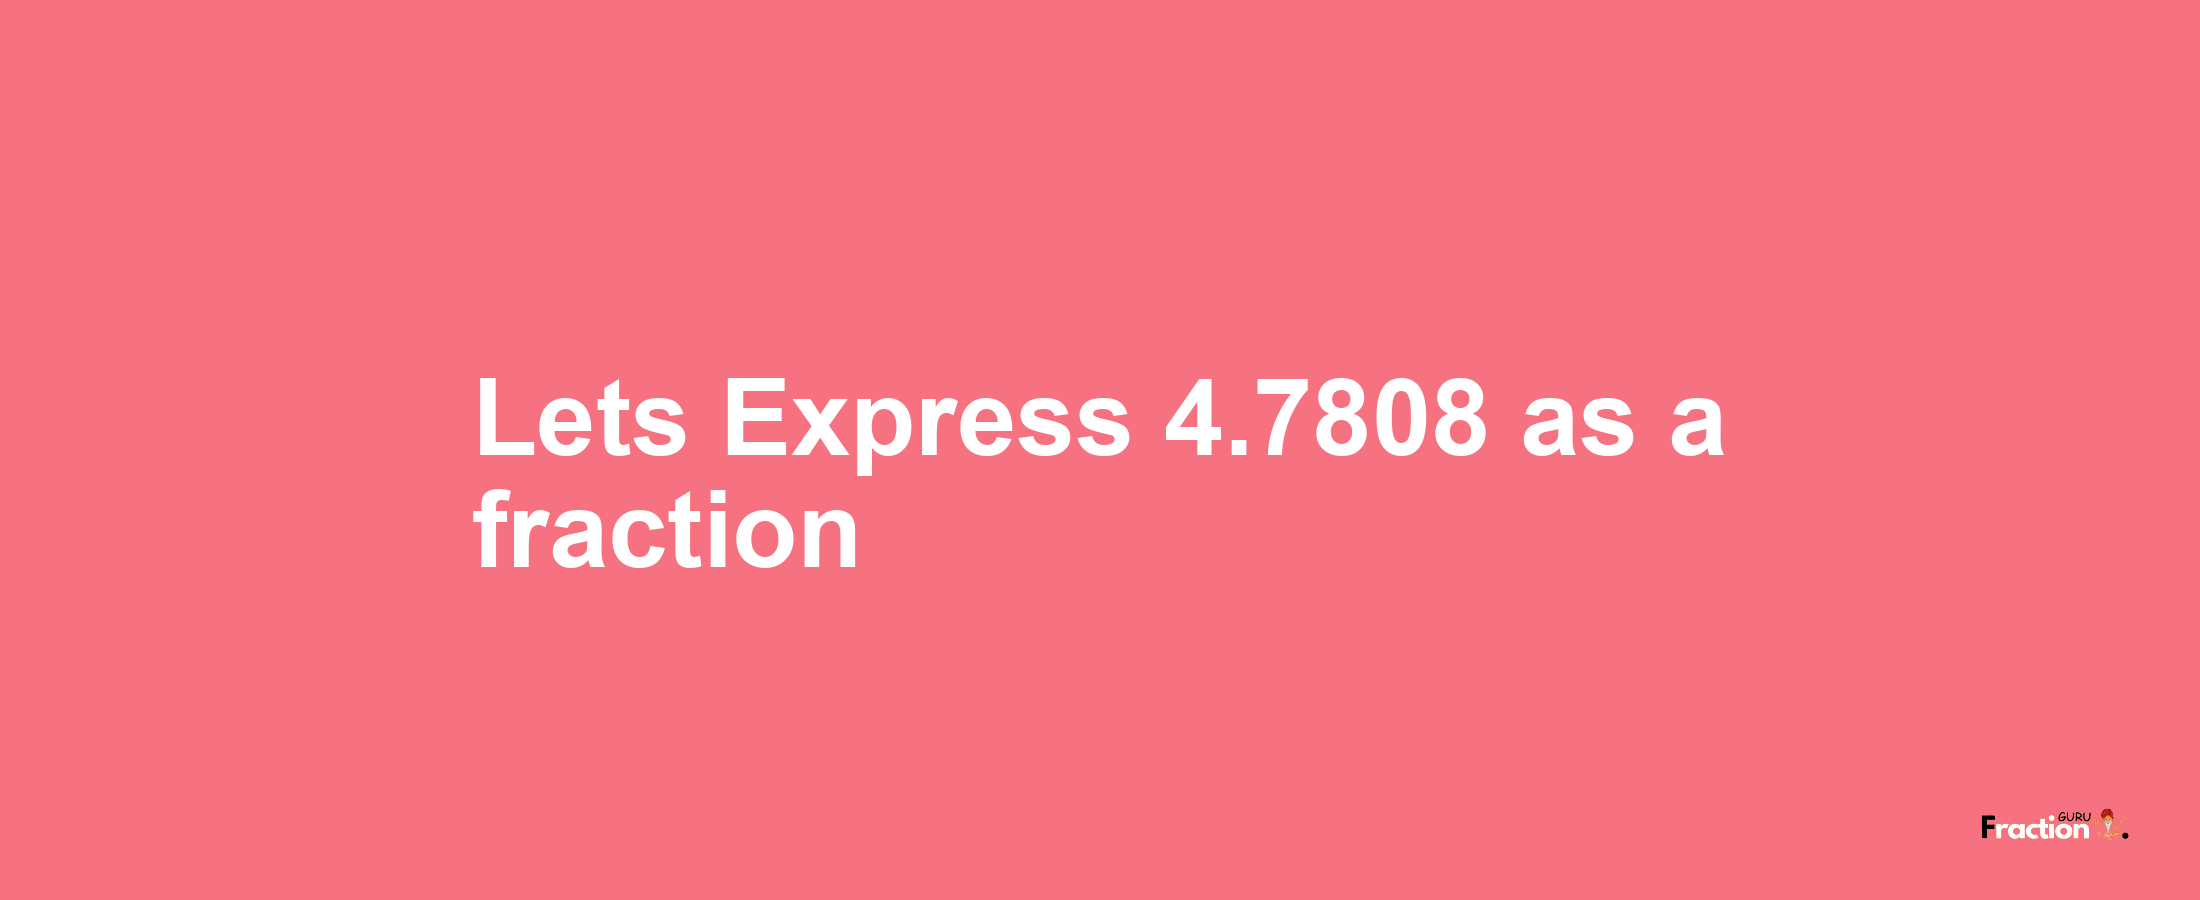 Lets Express 4.7808 as afraction